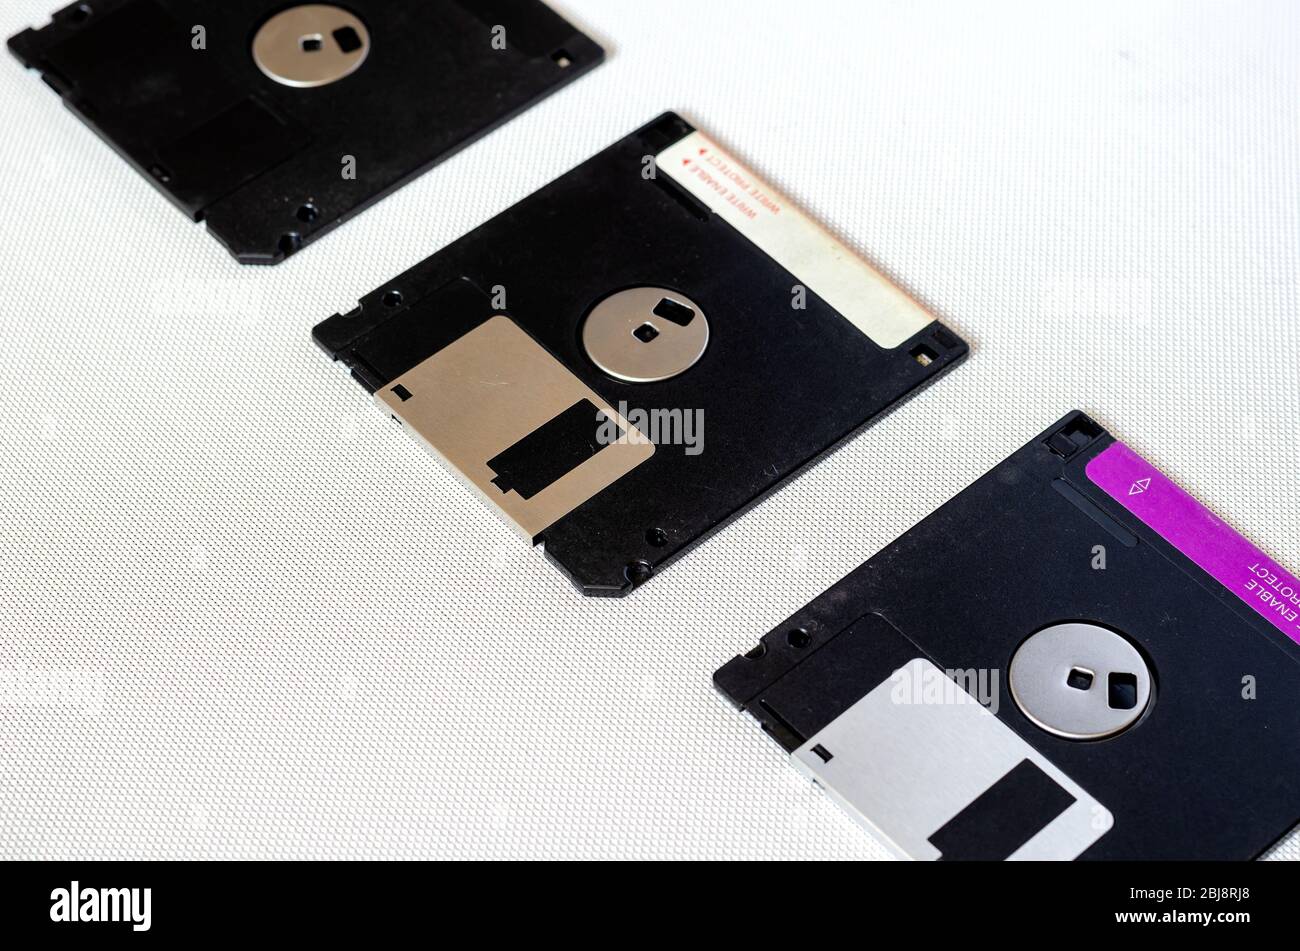 3.5 inch magnetic floppy disks. Three floppy disks with a capacity of 1.44 MB. Obsolete digital data storage media. Close-up. Selective focus. Stock Photo